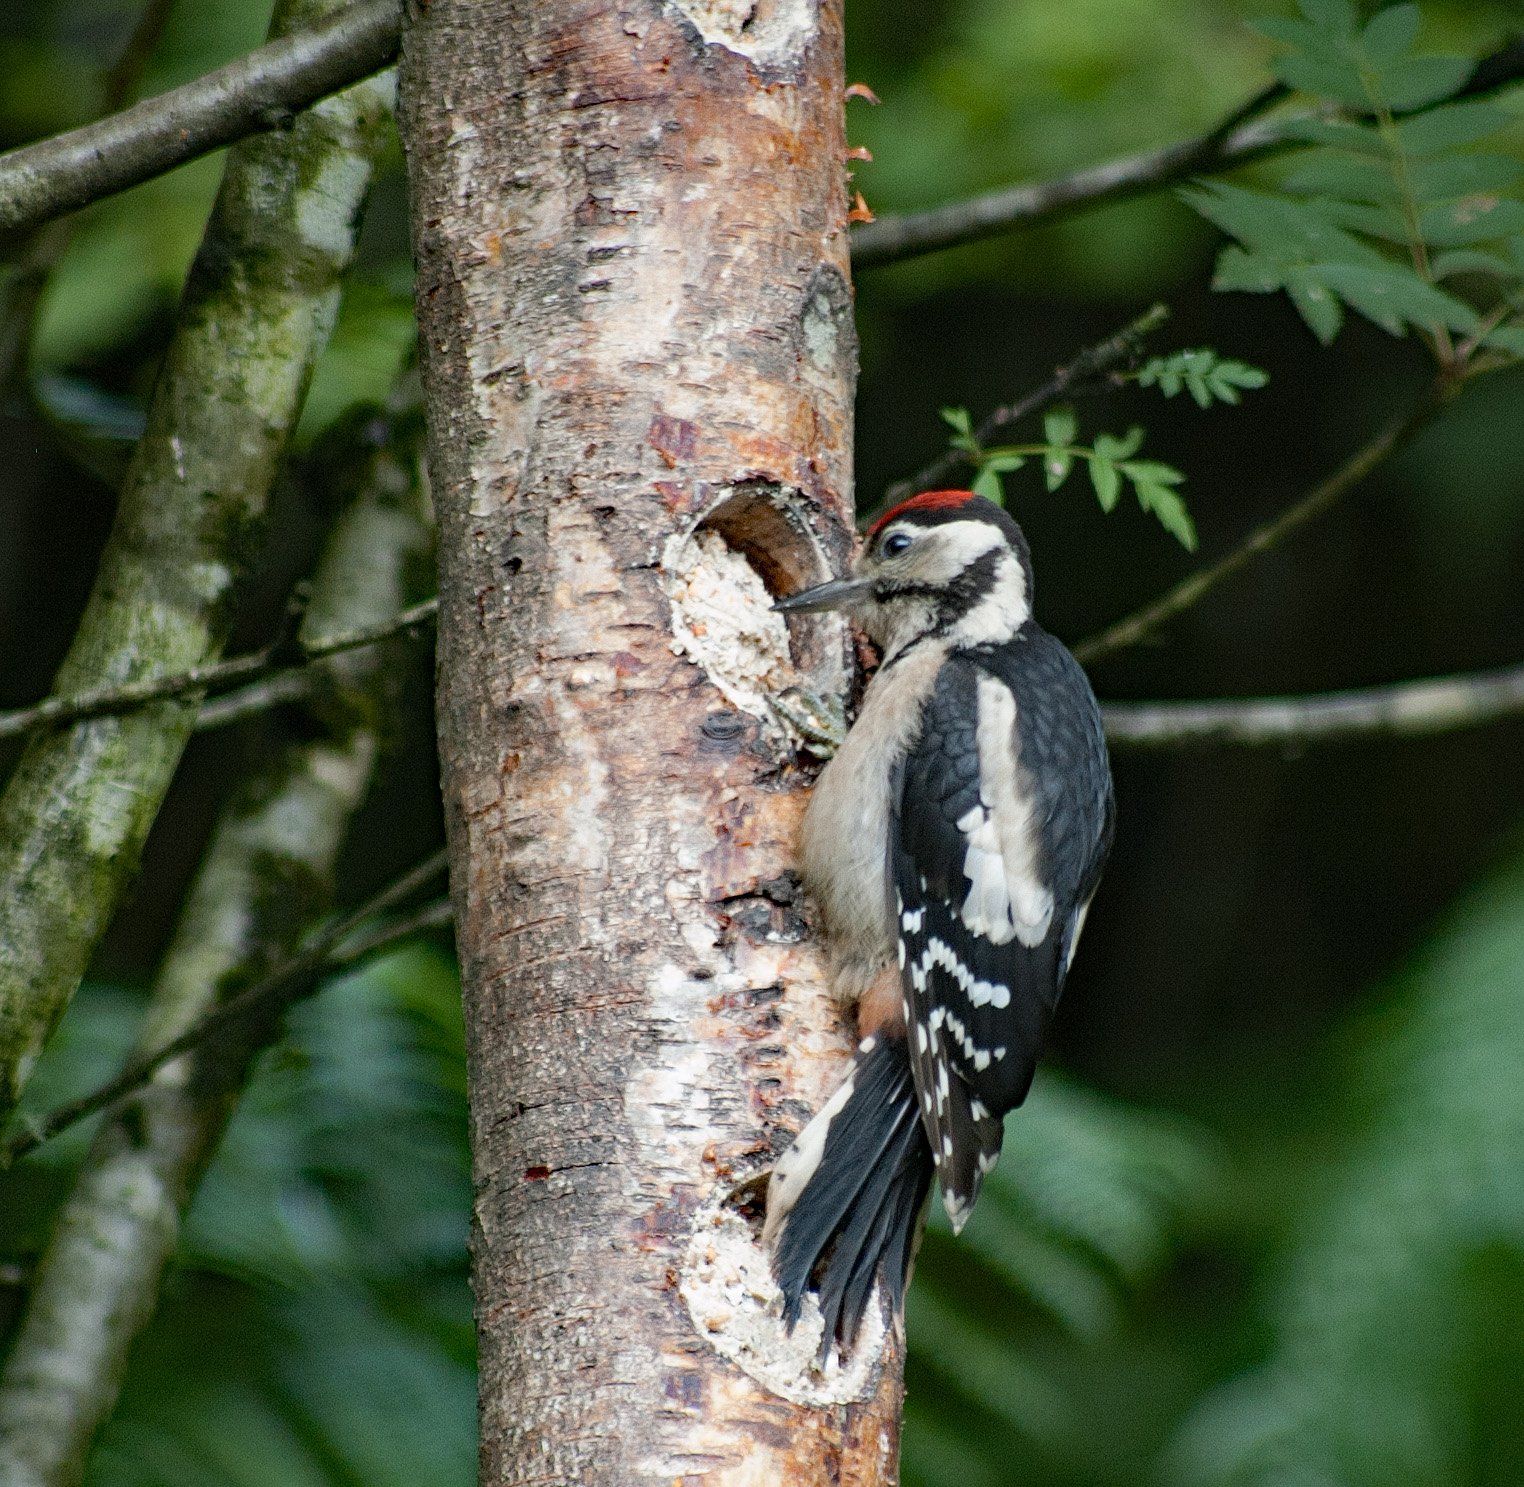 Great spotted woodpecker from our viewing window